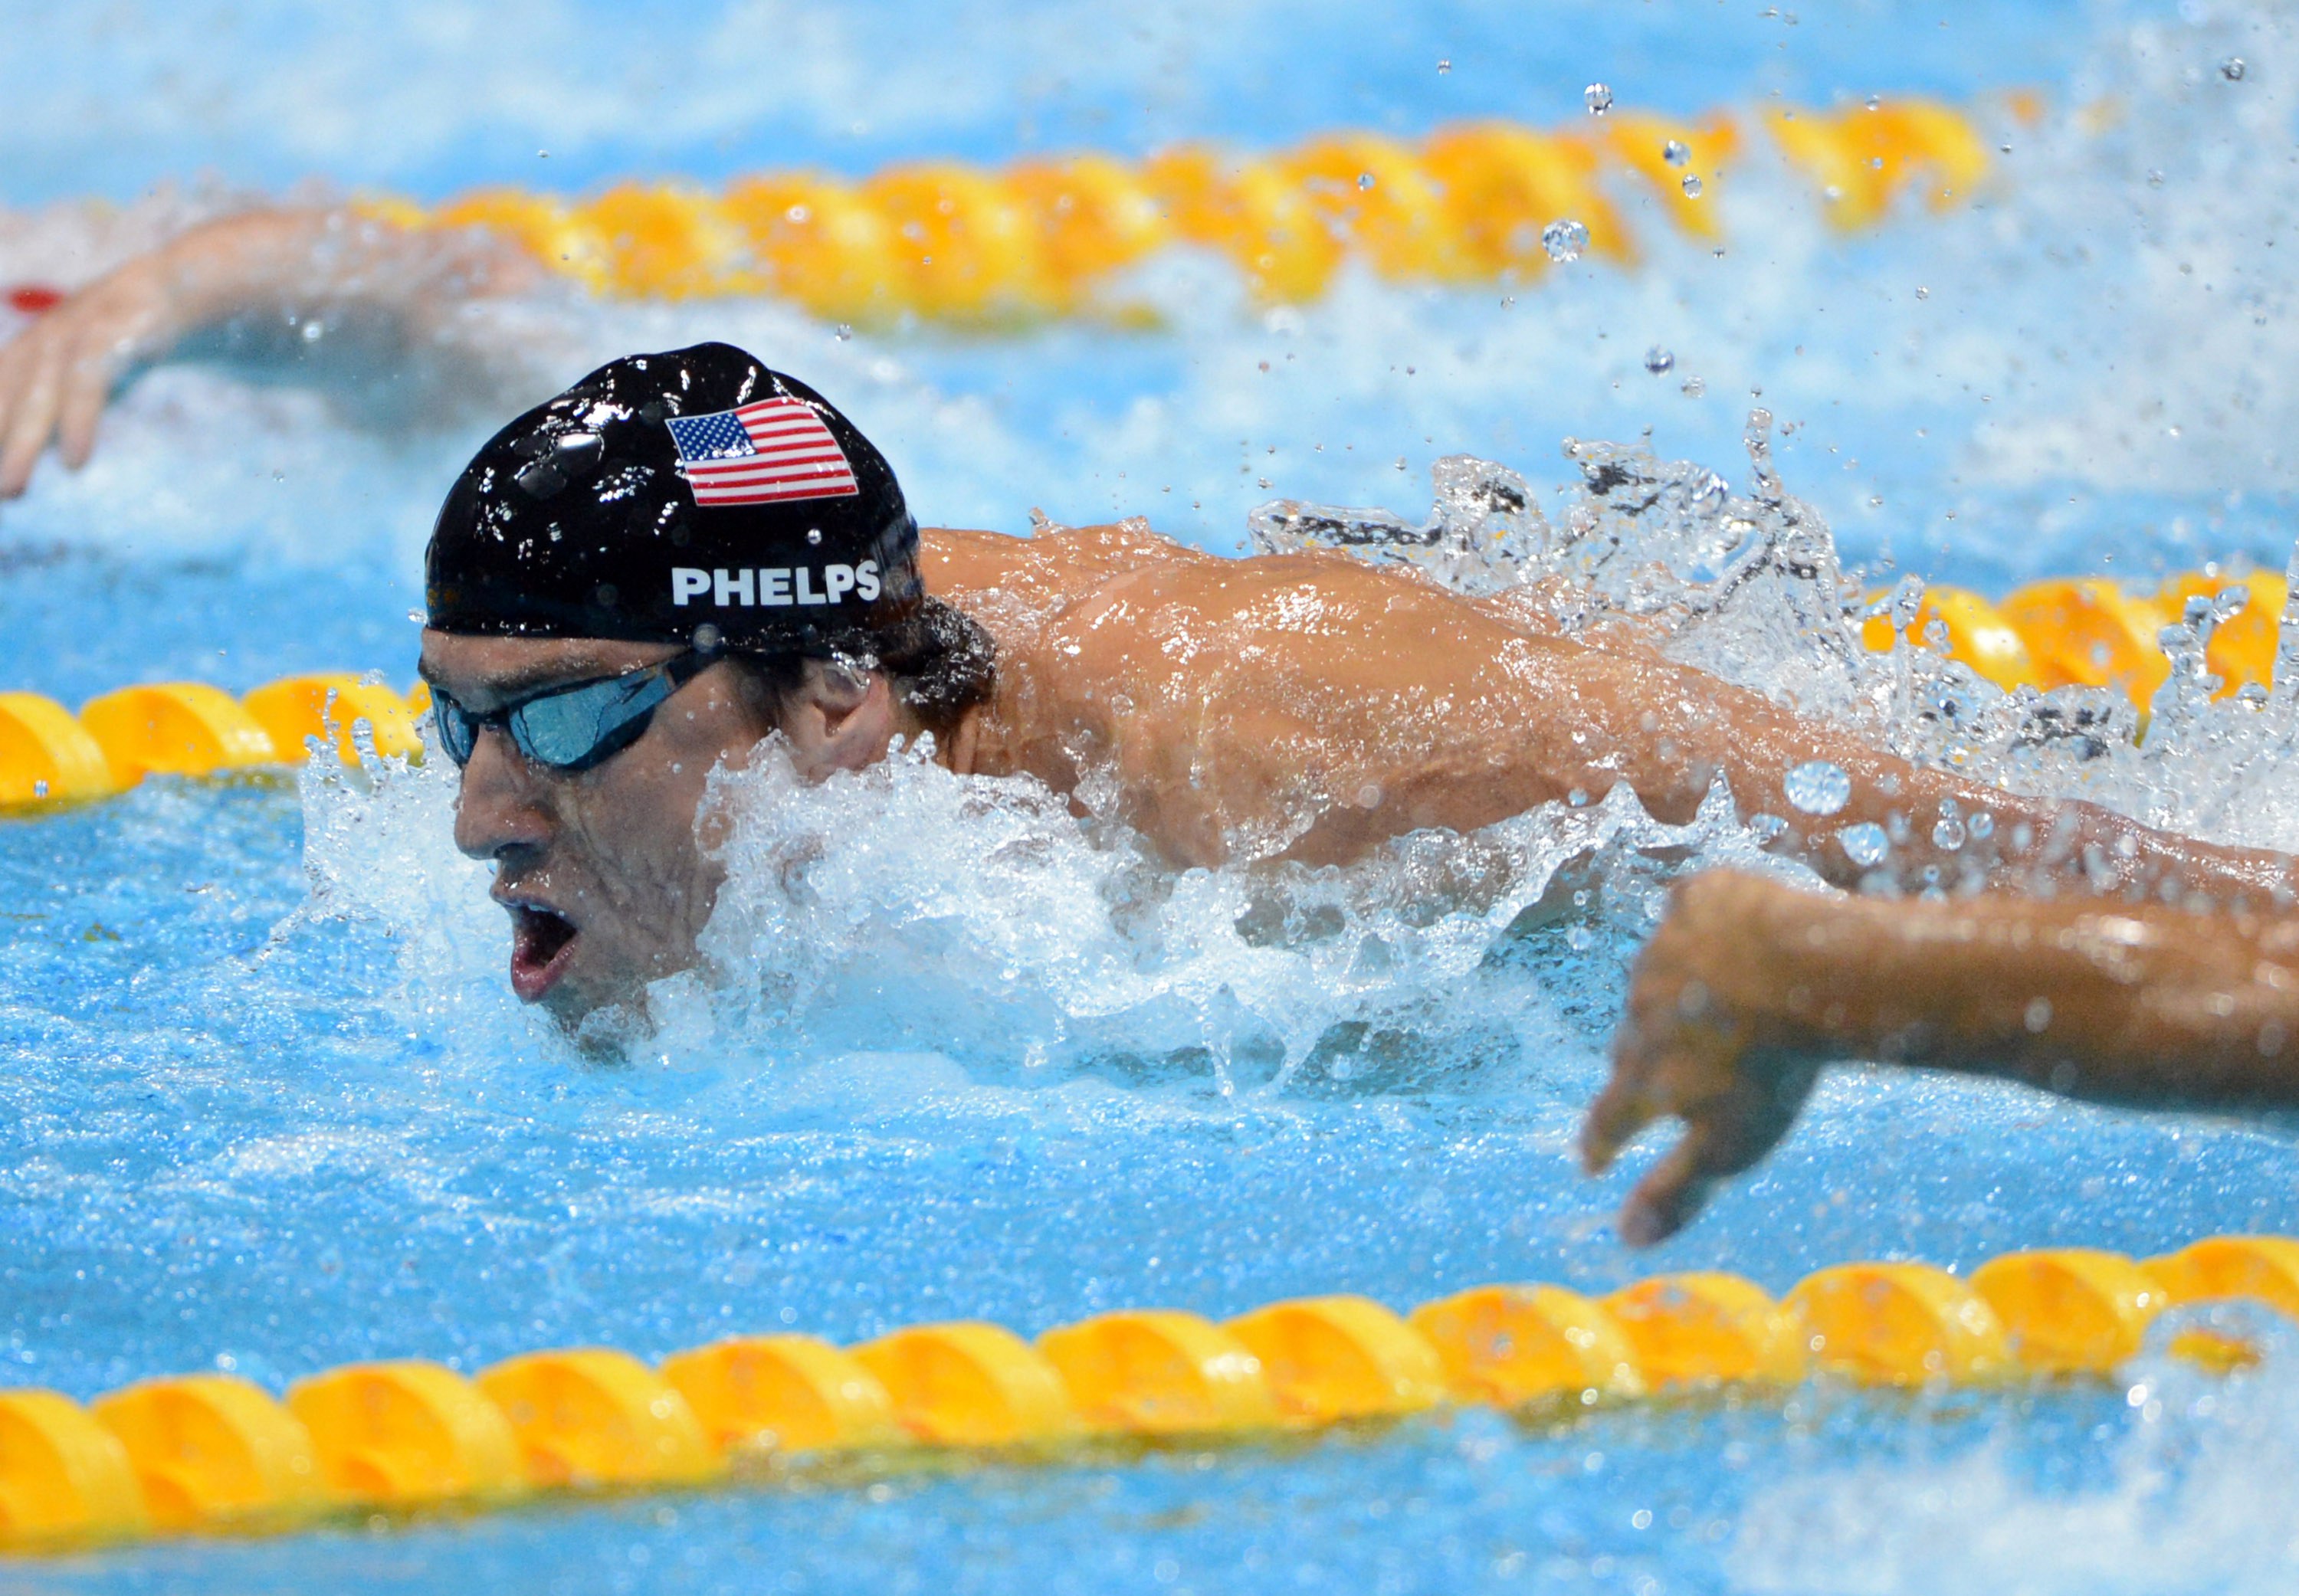 Michael Phelps - 04.08.2012 - 4x100m - Jeux Olympiques 2012 Photo : Visual / Icon Sport